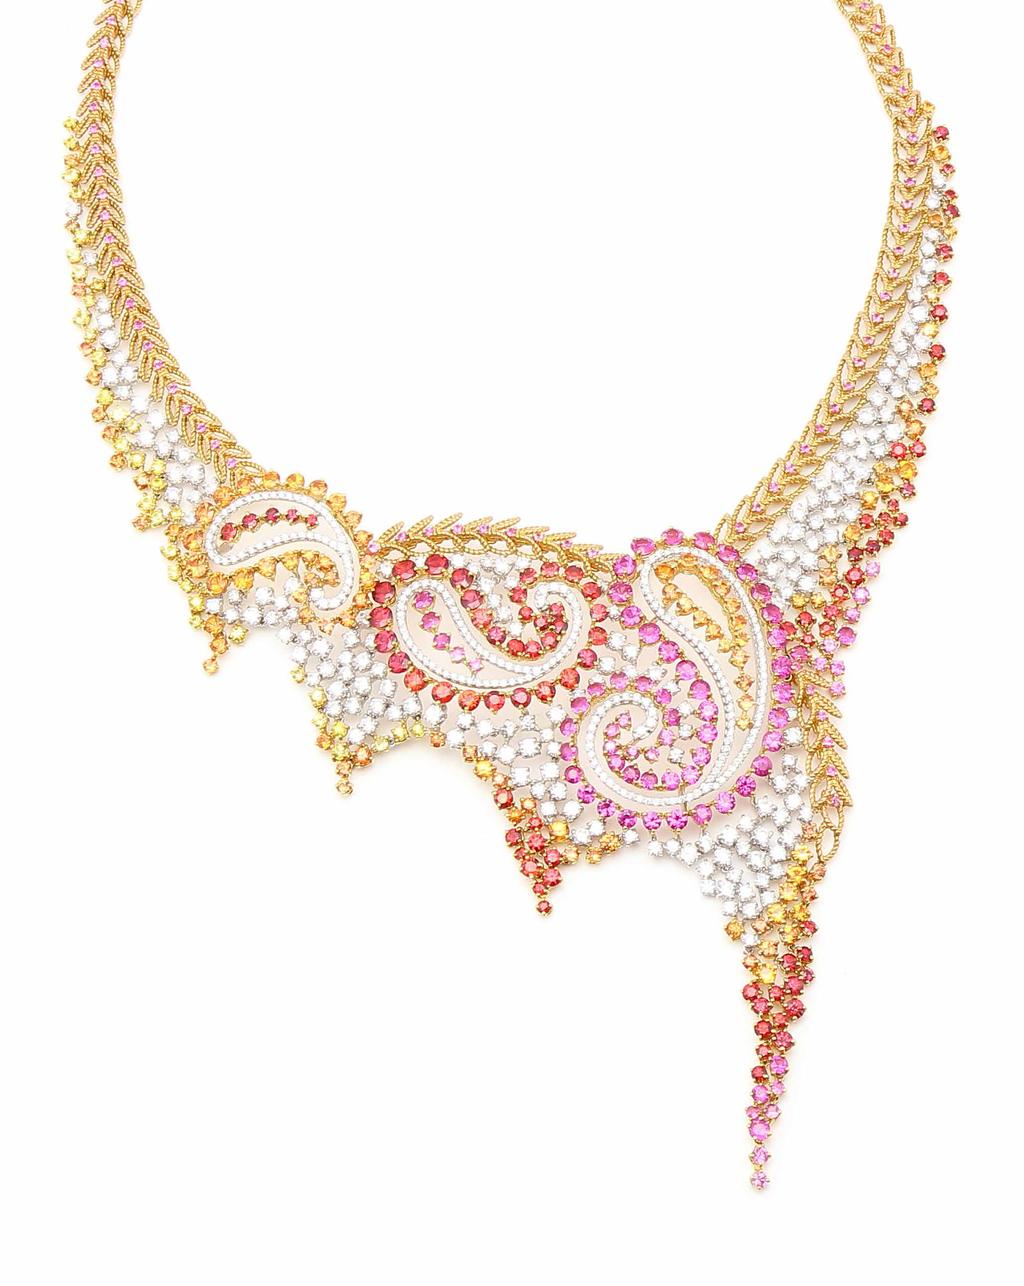 Necklace in 18K yellow gold set with round brilliant-cut diamonds (13.38 carats), orange sapphires (11.16 carats), pink sapphires (12.17 carats), red sapphires (11.21 carats), and yellow sapphires (2.